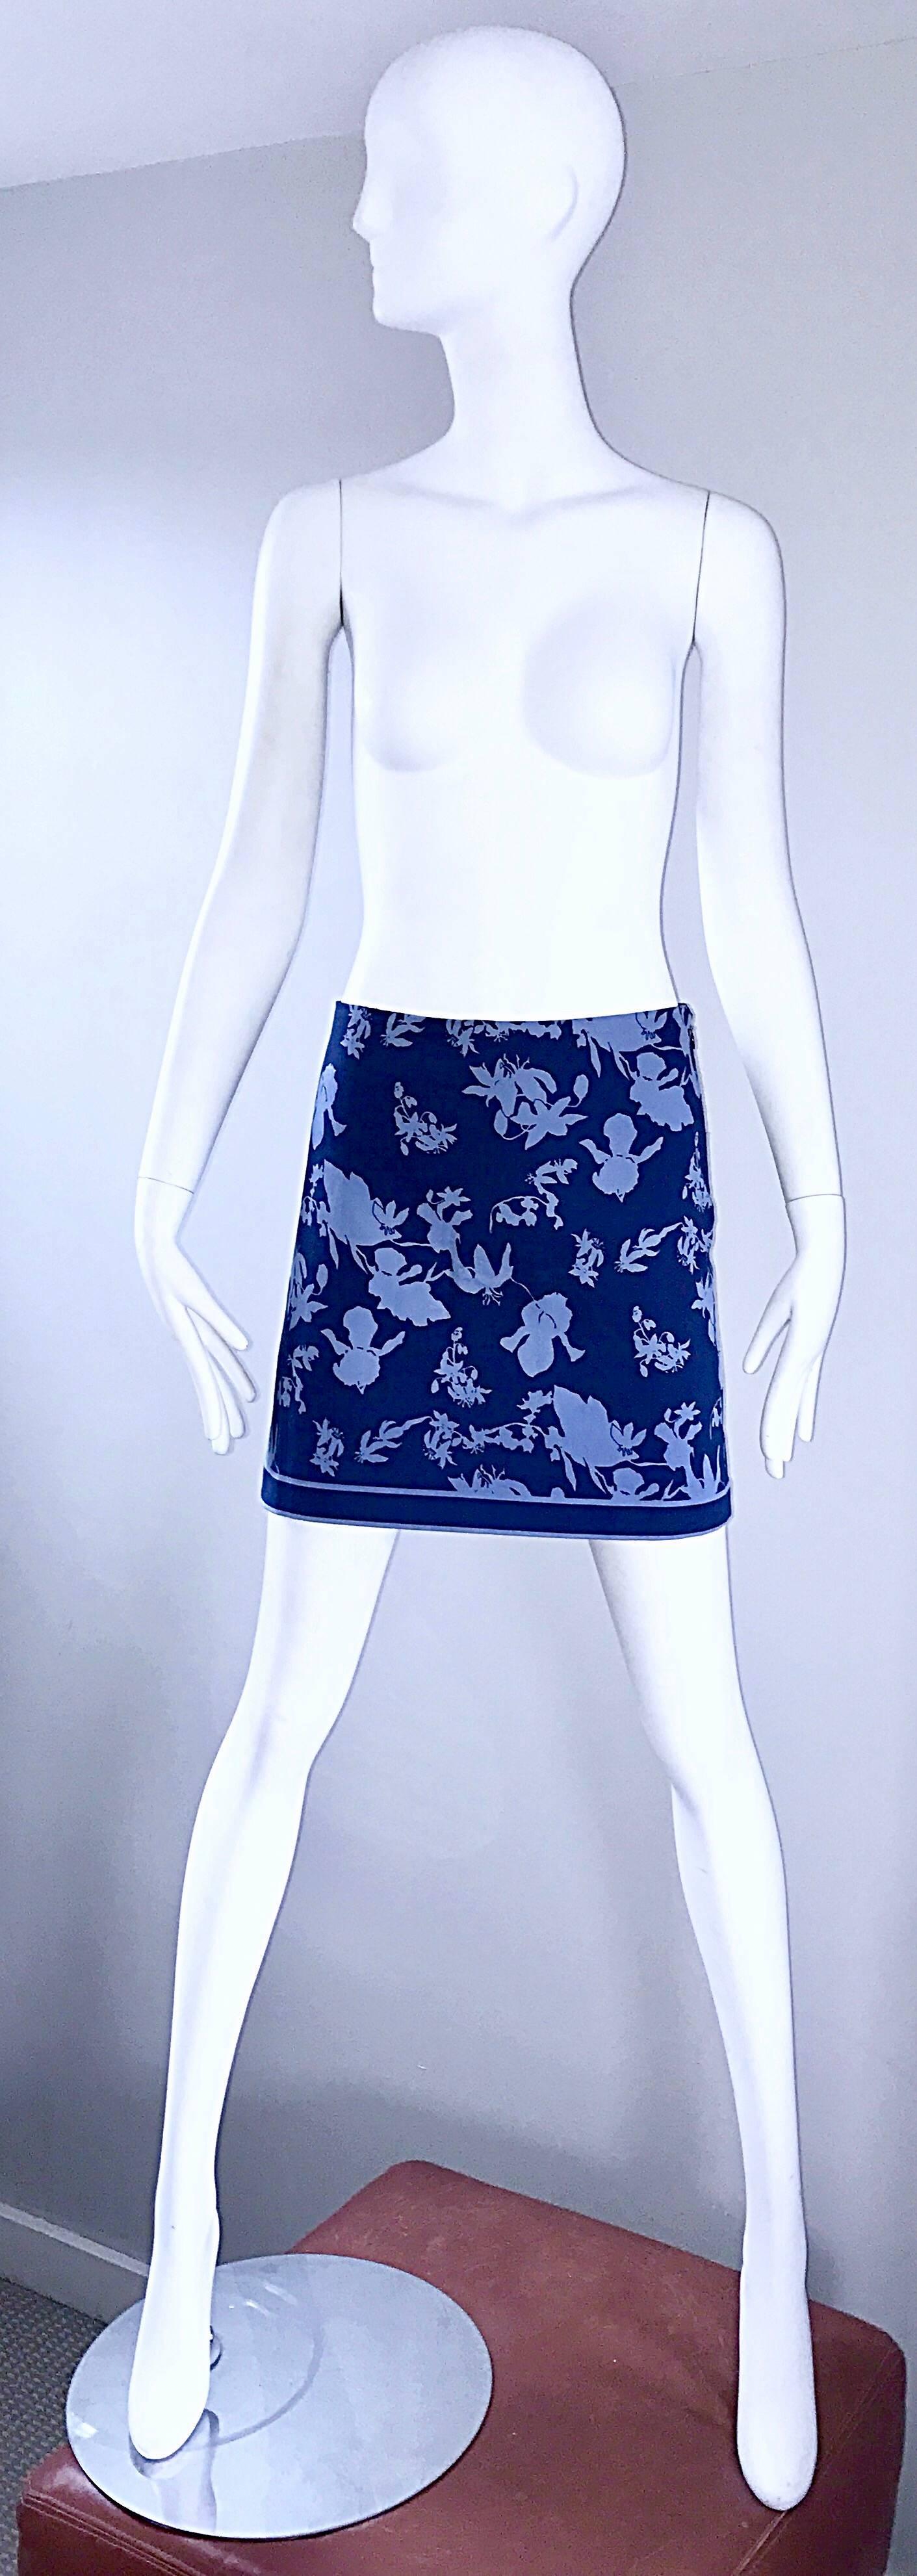 Chic brand new MICHAEL KORS COLLECTION size 8 tropical nautical mini skirt! Features navy blue soft cotton, with pale blue flower and foliage print throughout. Stripe at hem. Sits low on the hips, and pays homage to the 1990s / 90s. Hidden zipper up